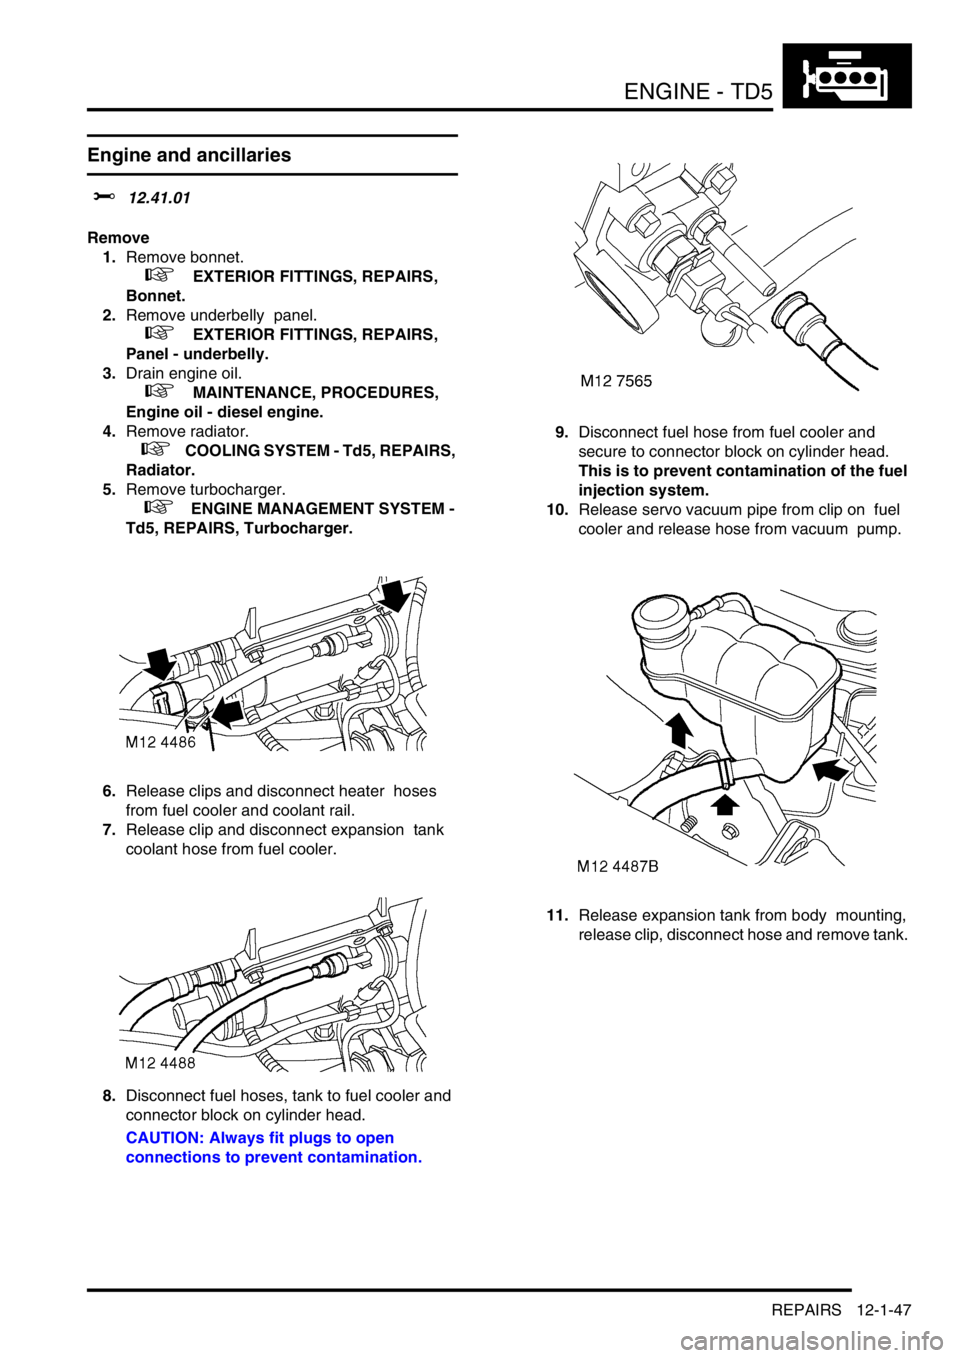 LAND ROVER DISCOVERY 2002 User Guide ENGINE - TD5
REPAIRS 12-1-47
Engine and ancillaries  
$% 12.41.01 
Remove
1.Remove bonnet.
 
 +  EXTERIOR FITTINGS, REPAIRS, 
Bonnet.
2.Remove underbelly  panel. 
 
 +  EXTERIOR FITTINGS, REPAIRS, 
Pa